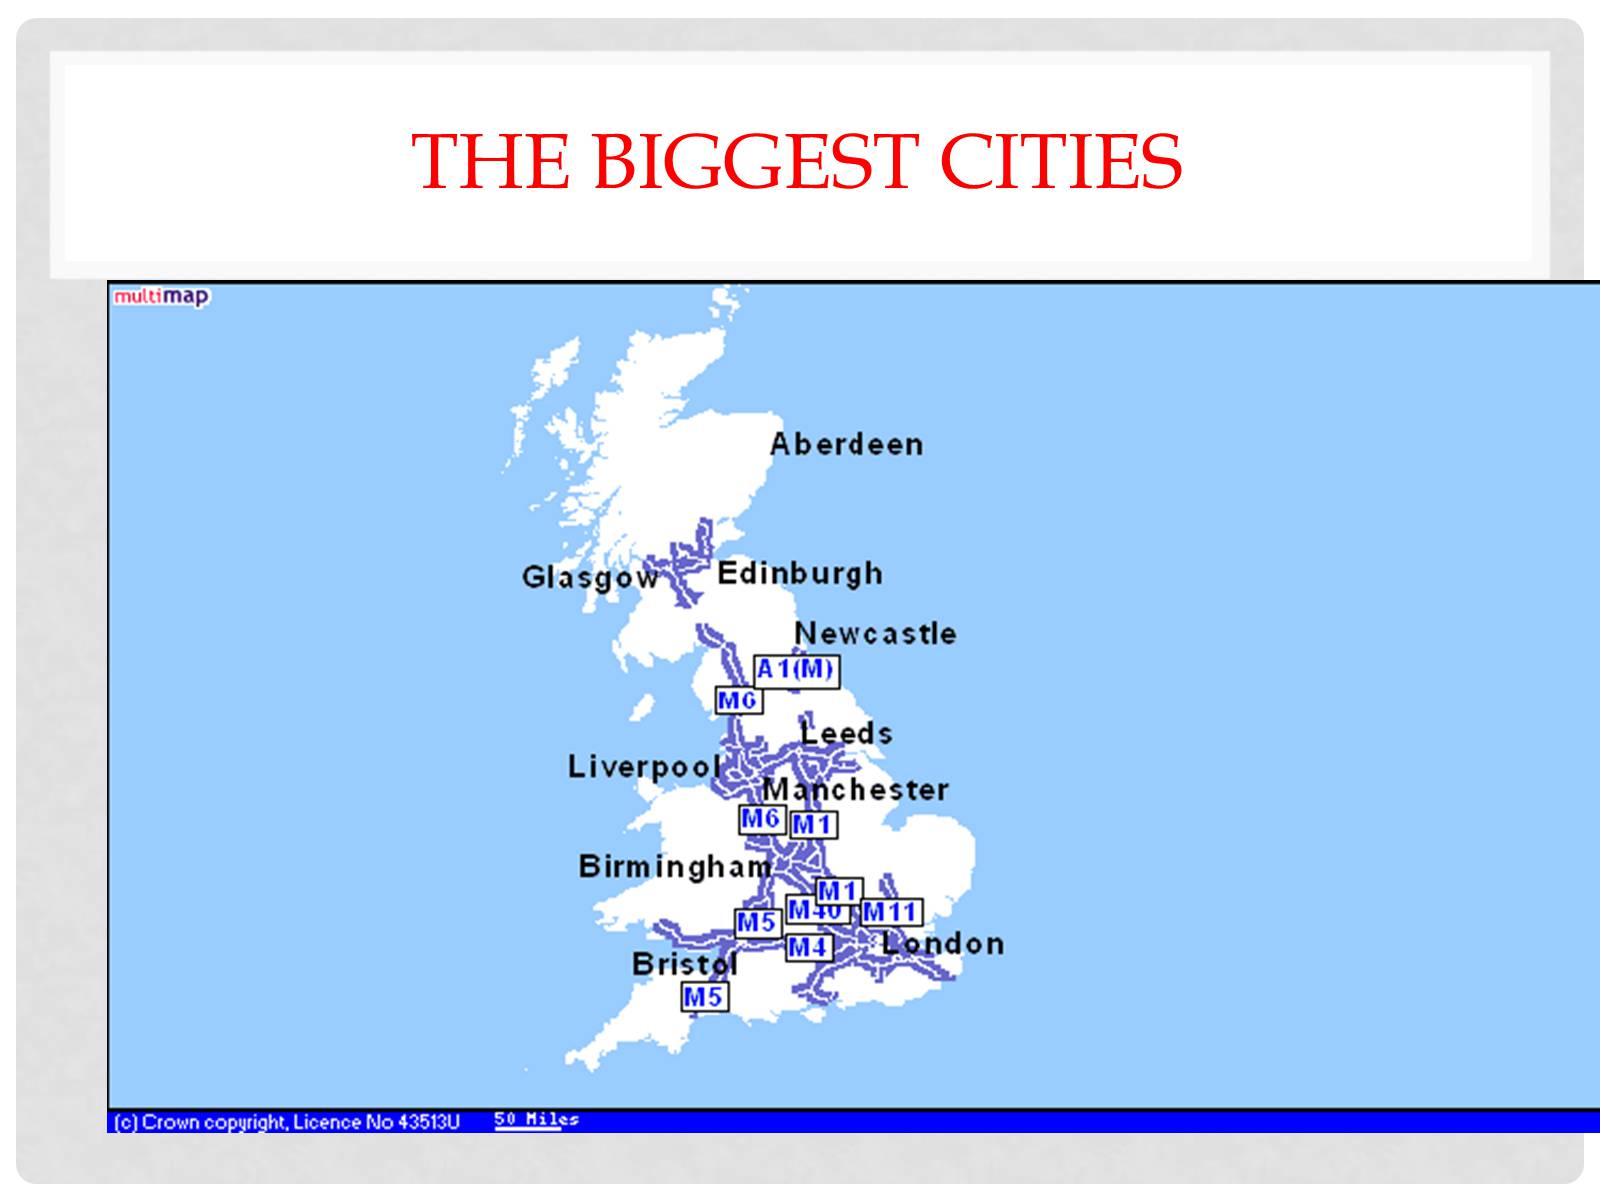 Large cities britain. Cities of great Britain. Cities of great Britain презентация. Main Cities of the uk. Large Cities of great Britain.